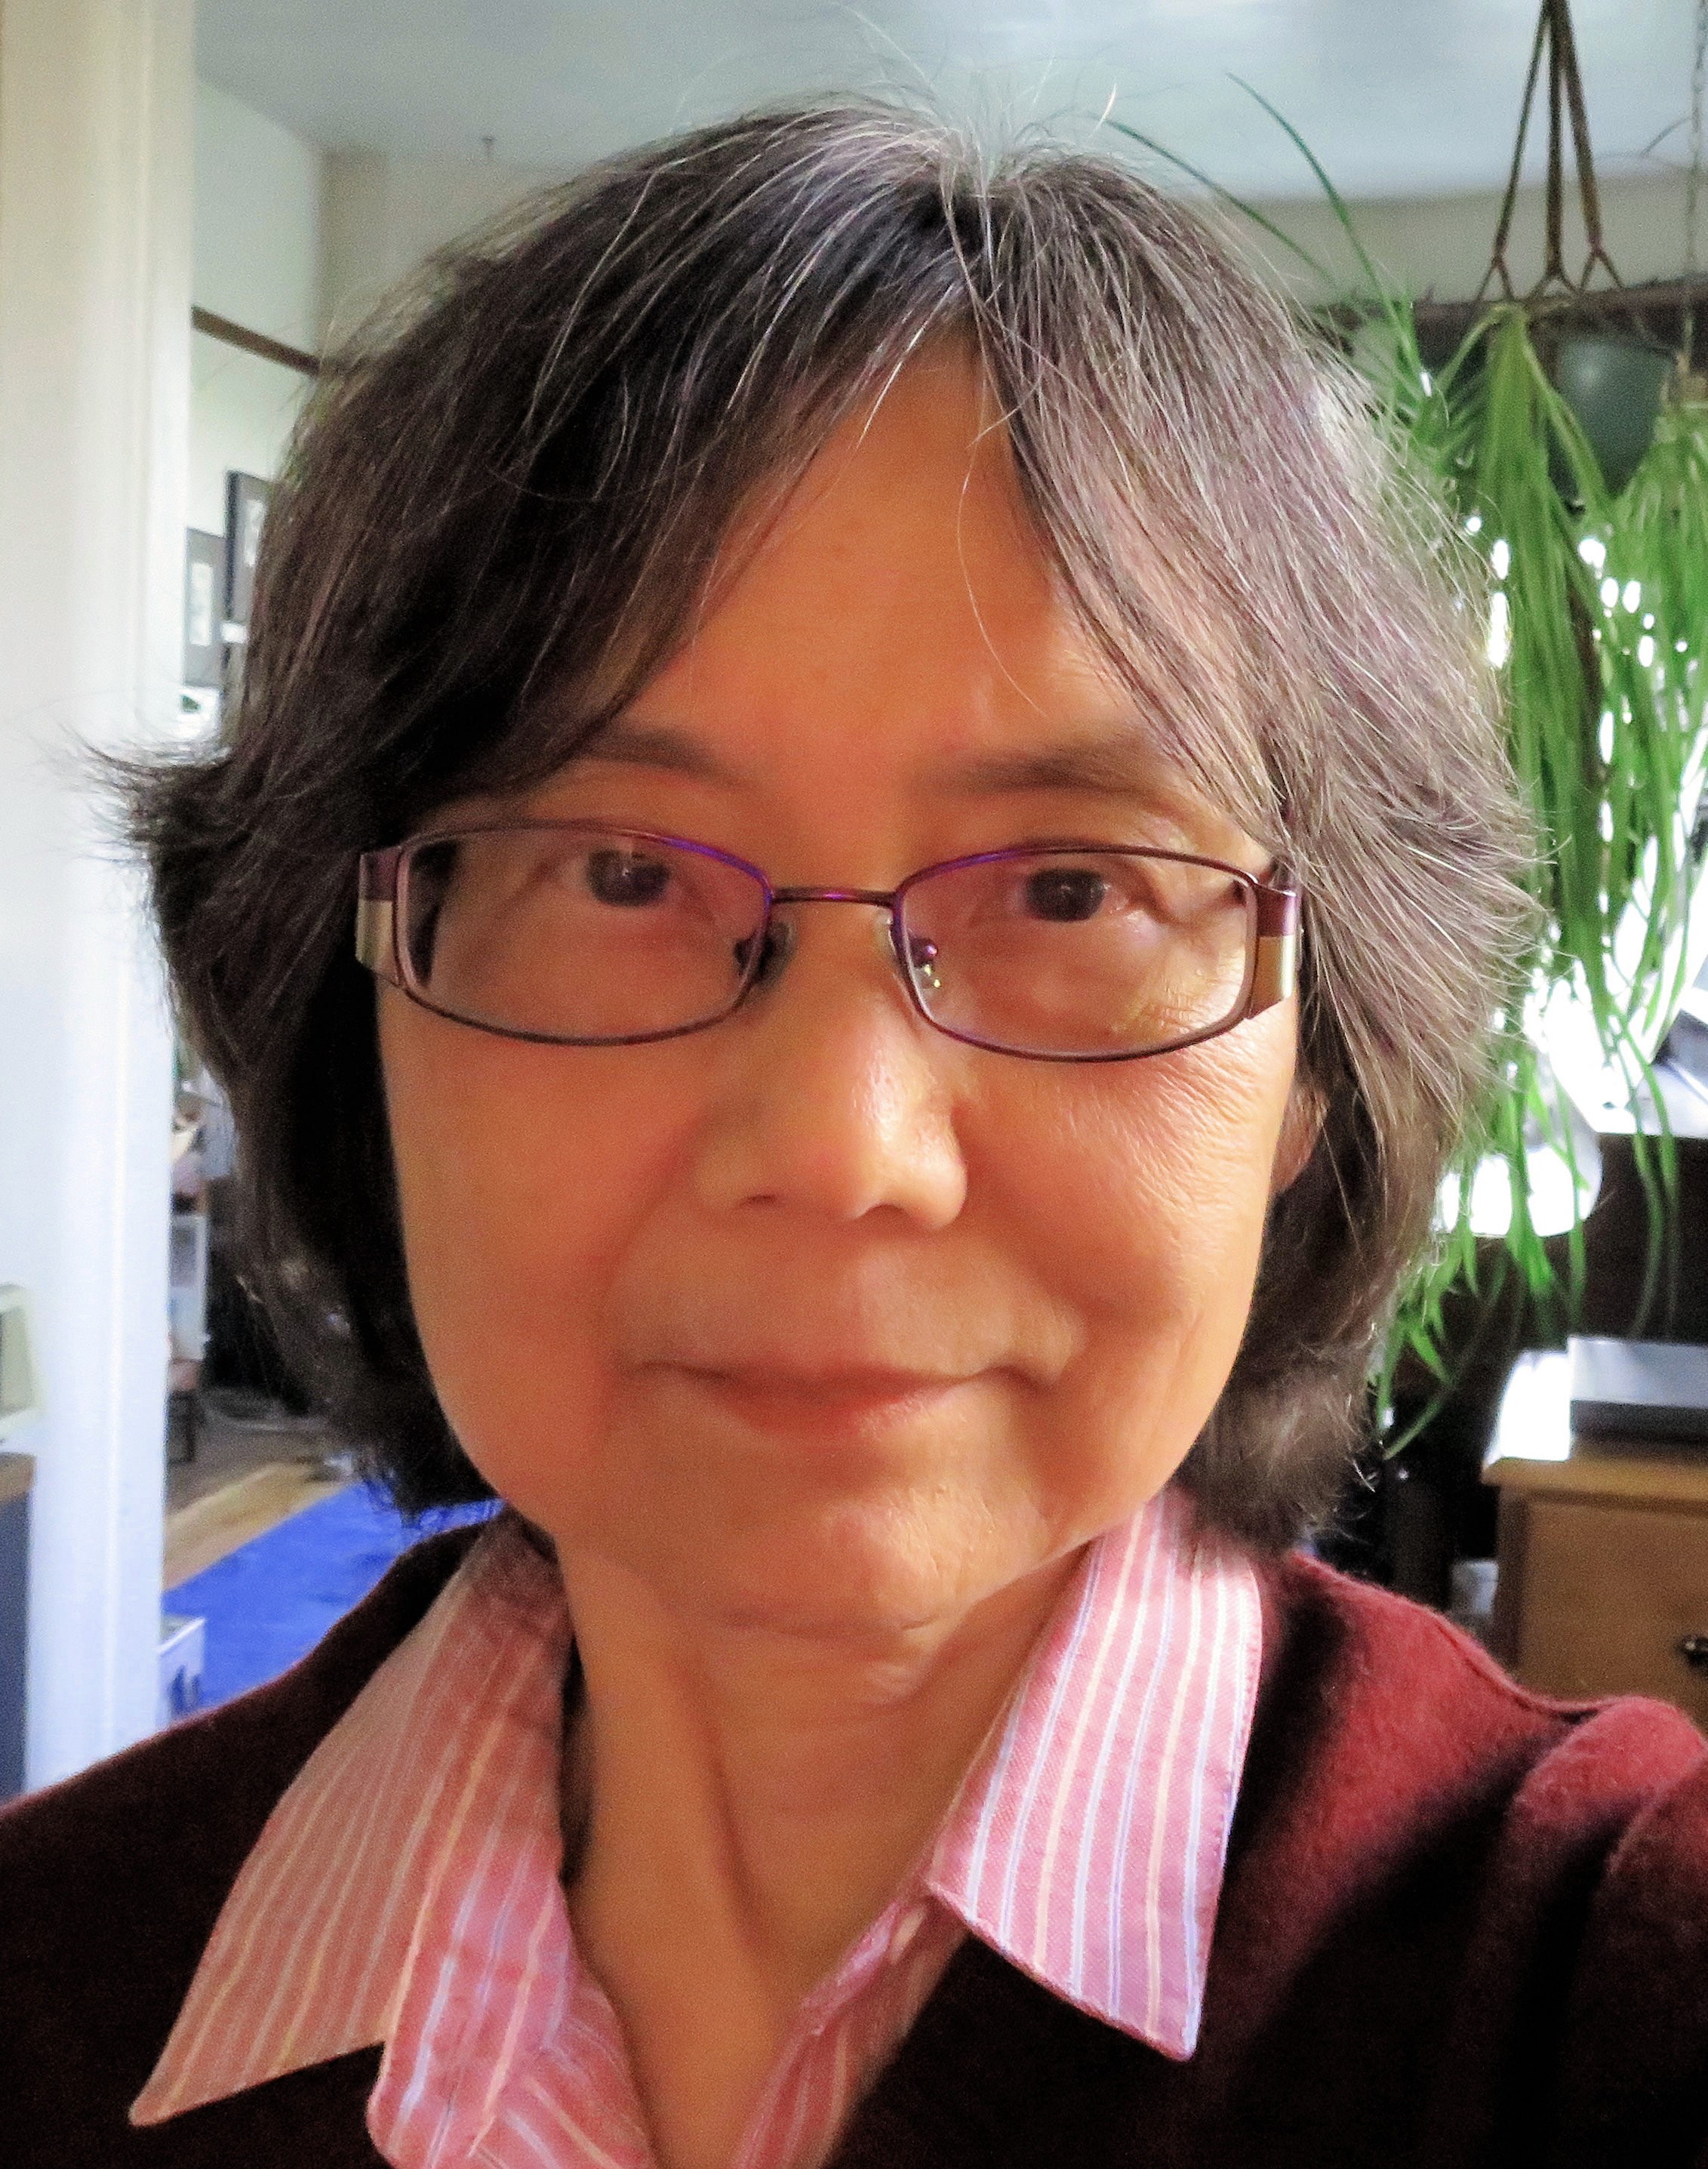 A portrait of Lena Tan, who has short greying black hair and wears black rectangular glasses and a striped pink collar shirt.